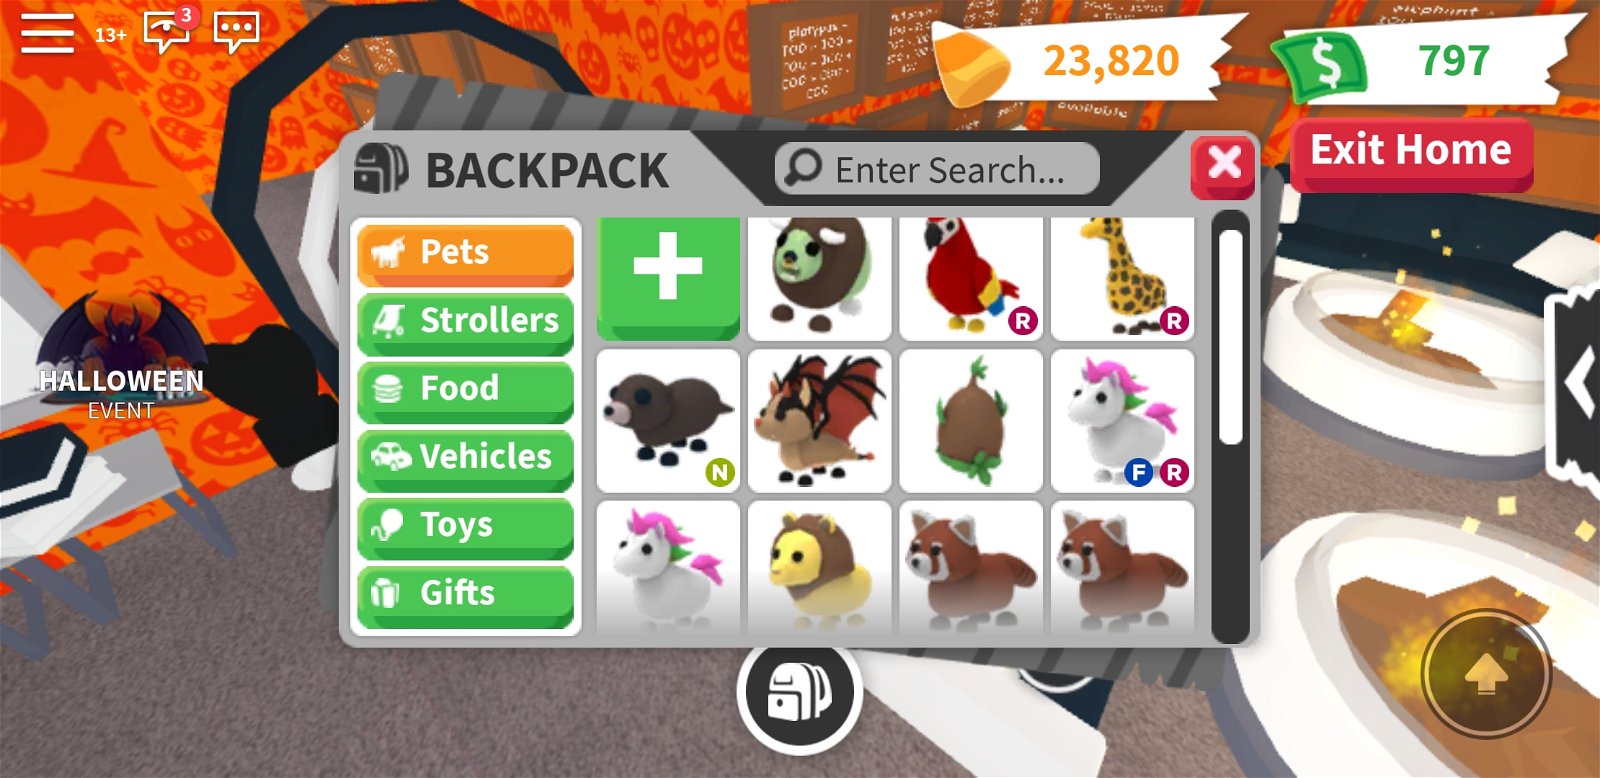 SOLD Adopt me legendary pets and 16 legendary vehicles - EpicNPC